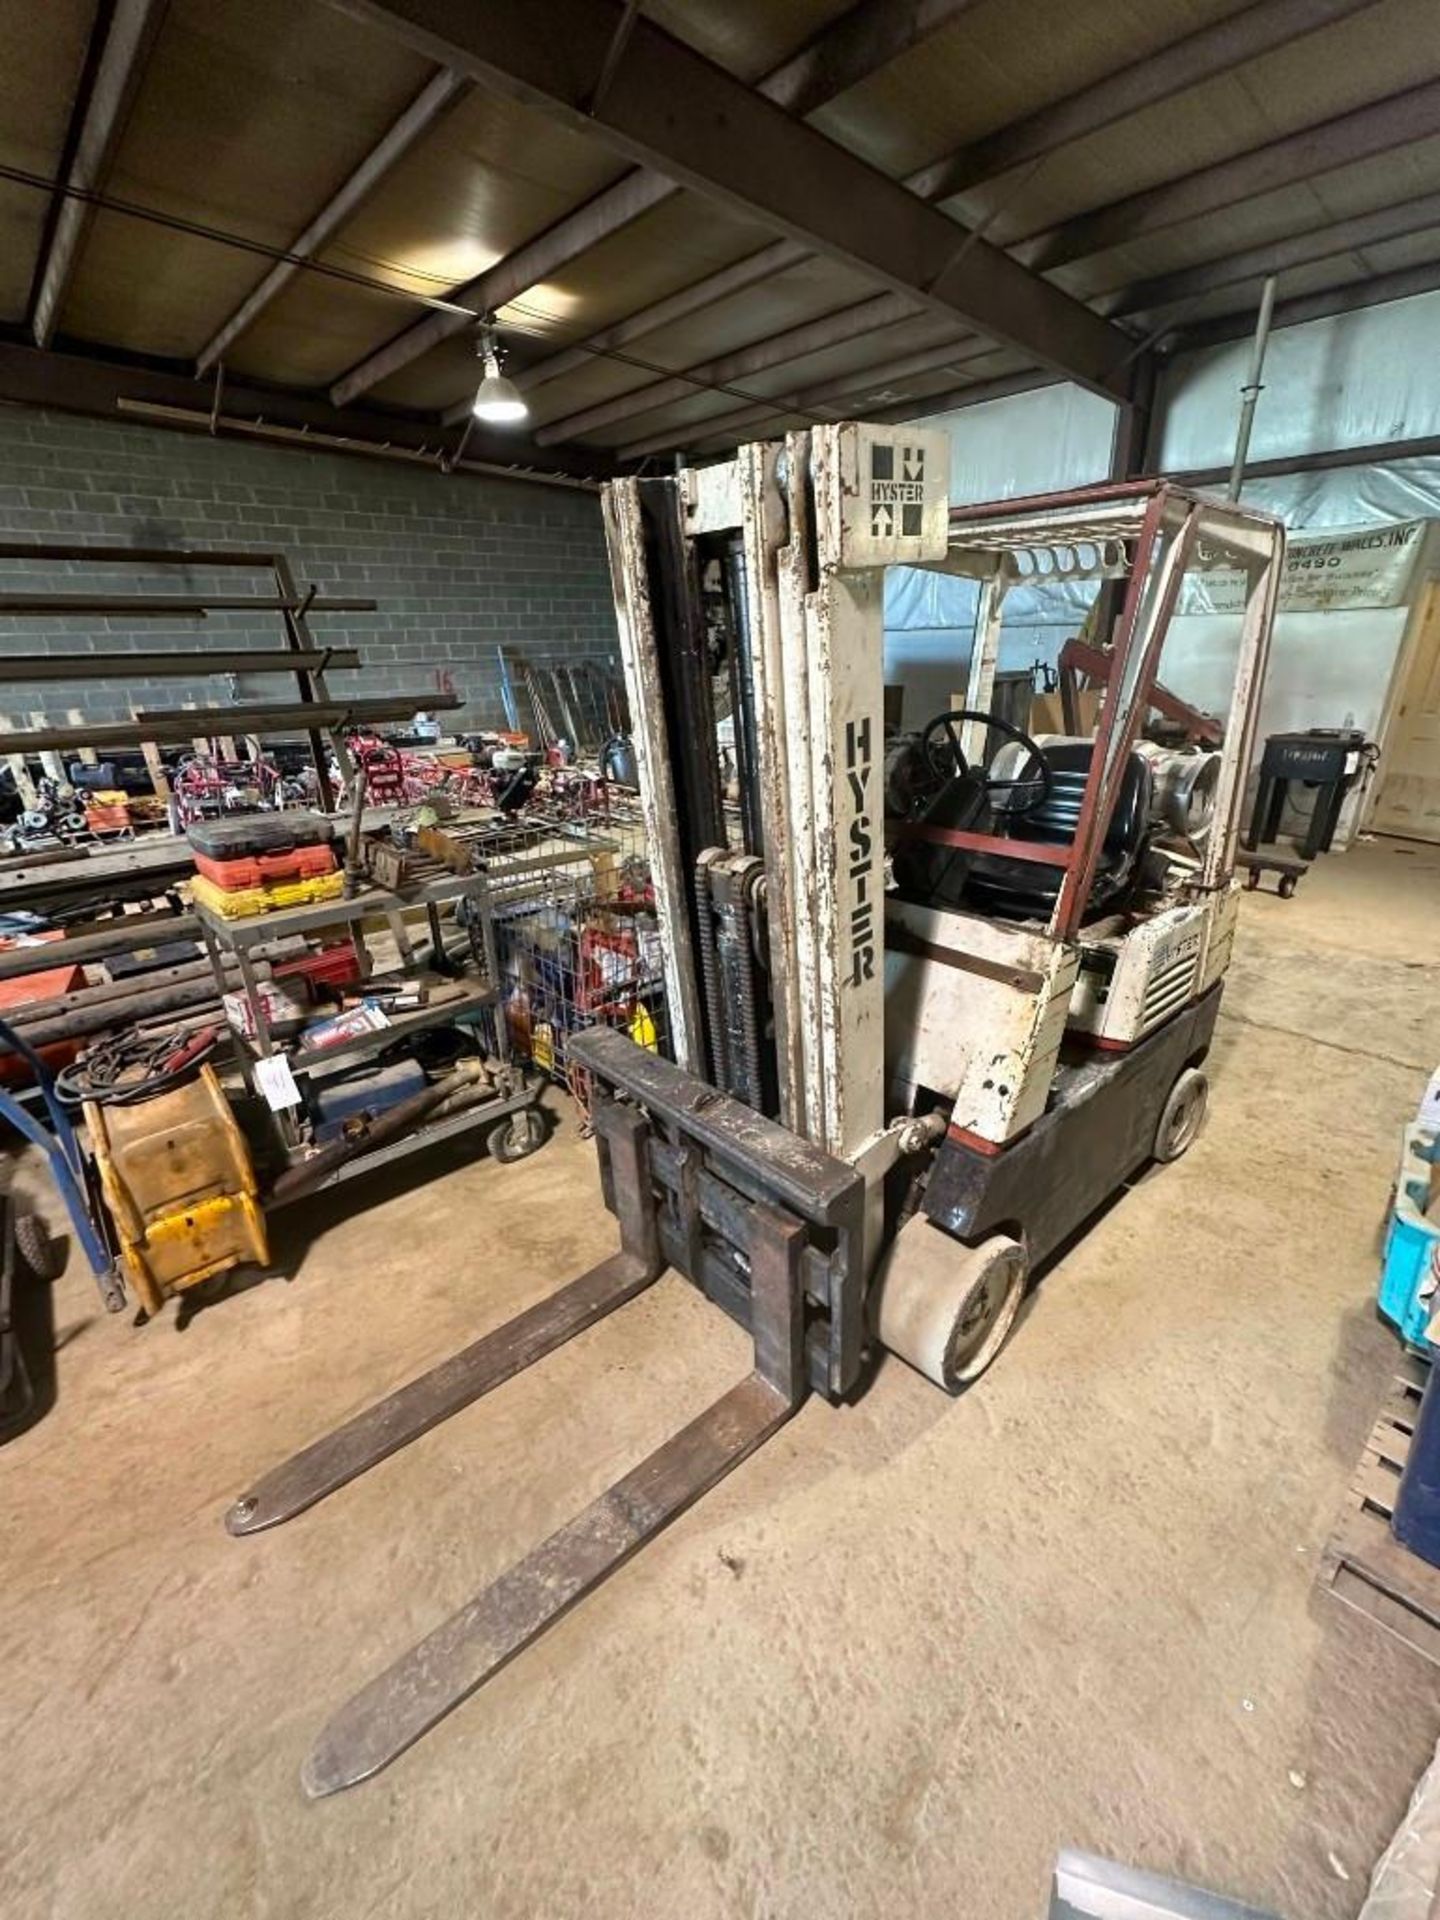 Hyster 4000lb forklift, 3 stage, hours: 6693, S/N: 0002002125W, operates but needs starter replaced